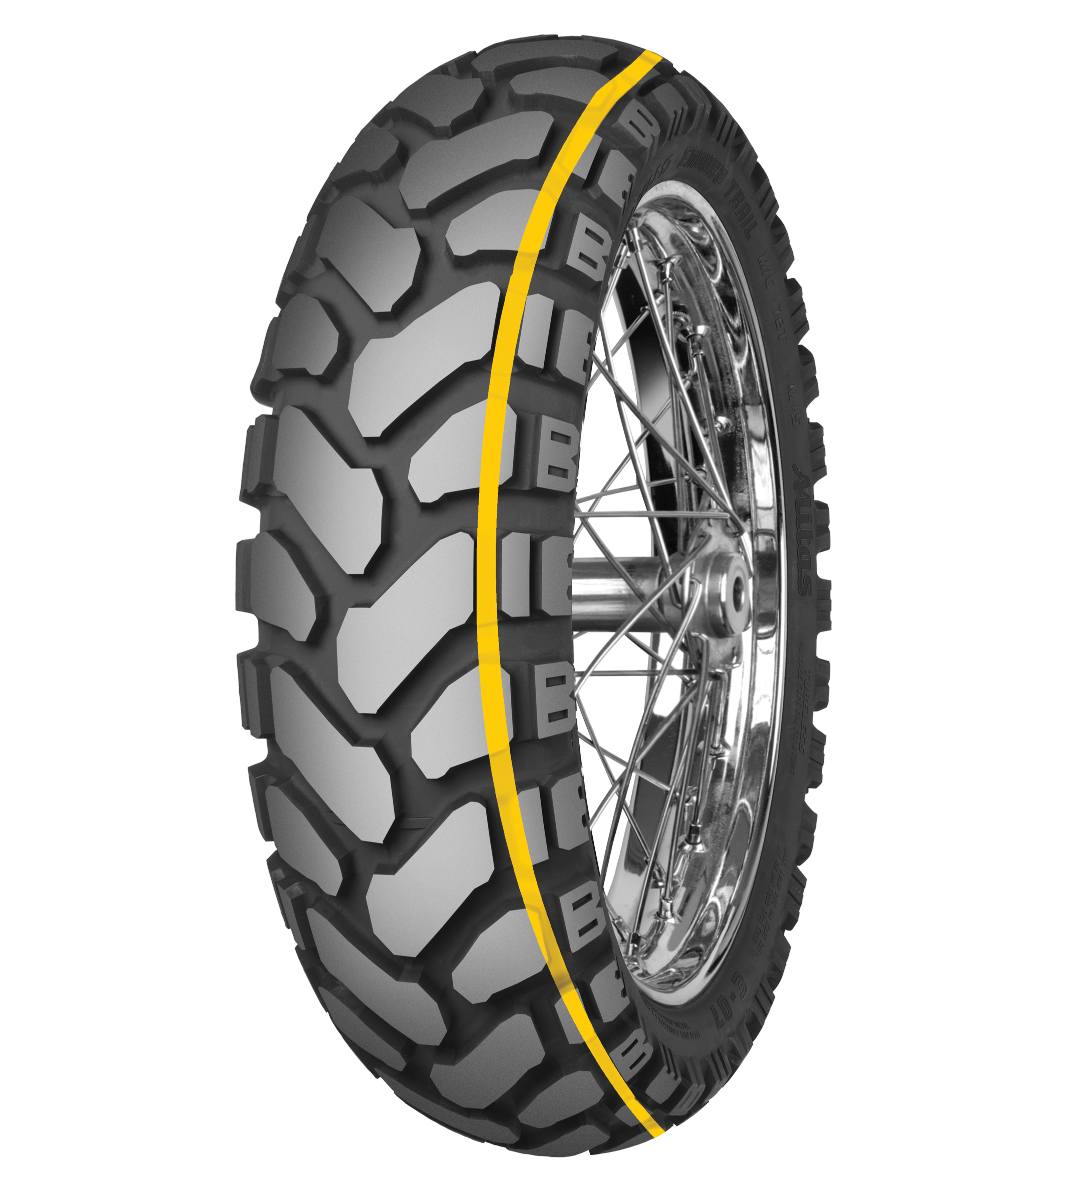 Mitas E-07+ ENDURO TRAIL 150/70B17 Trail ON Trail DAKAR 69T Yellow Tubeless Rear Tire, 224060, 150/70B17, Adventure Touring, E Series, E-07+ Enduro Trail, Rear, Trail, Trail ON, Tires - Imported and distributed in North & South America by Lindeco Genuine Powersports - Premier Powersports Equipment and Accessories for Motorcycle Enthusiasts, Professional Riders and Dealers.